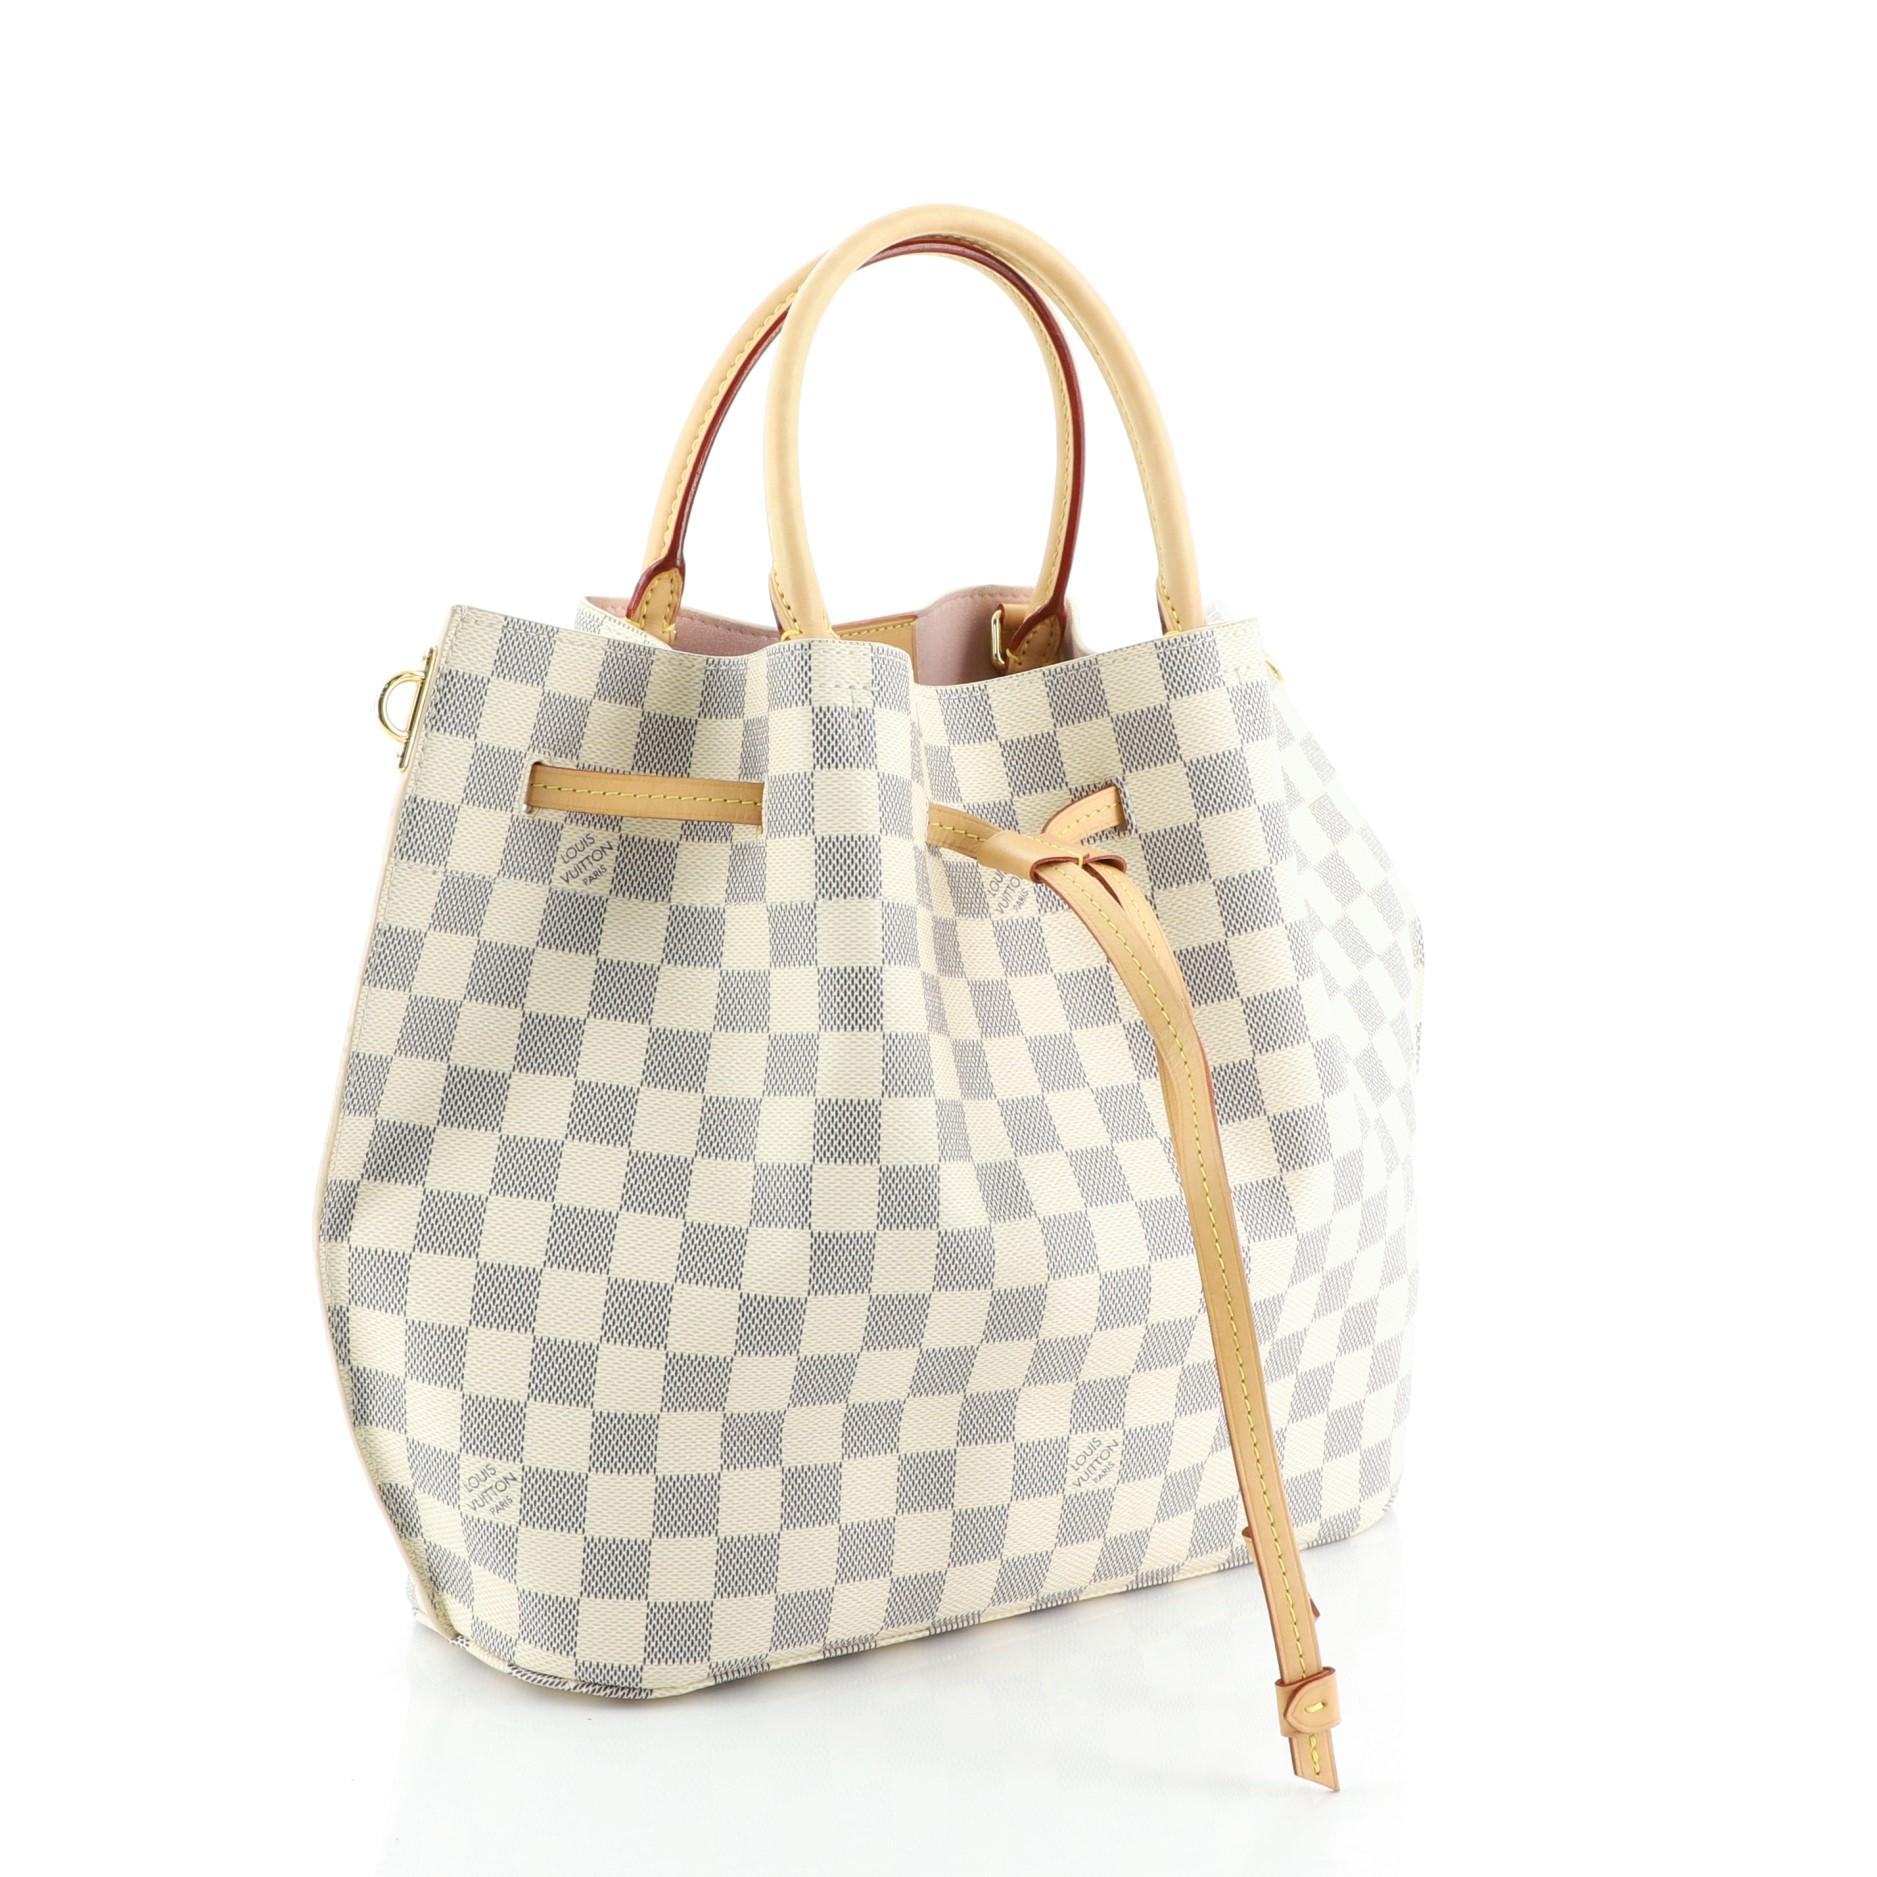 This Louis Vuitton Girolata Handbag Damier, crafted in damier azur coated canvas, features dual rolled handles and gold-tone hardware. Its drawstring closure opens to a pink microfiber interior with side zip pocket. Authenticity code reads: GI3156.